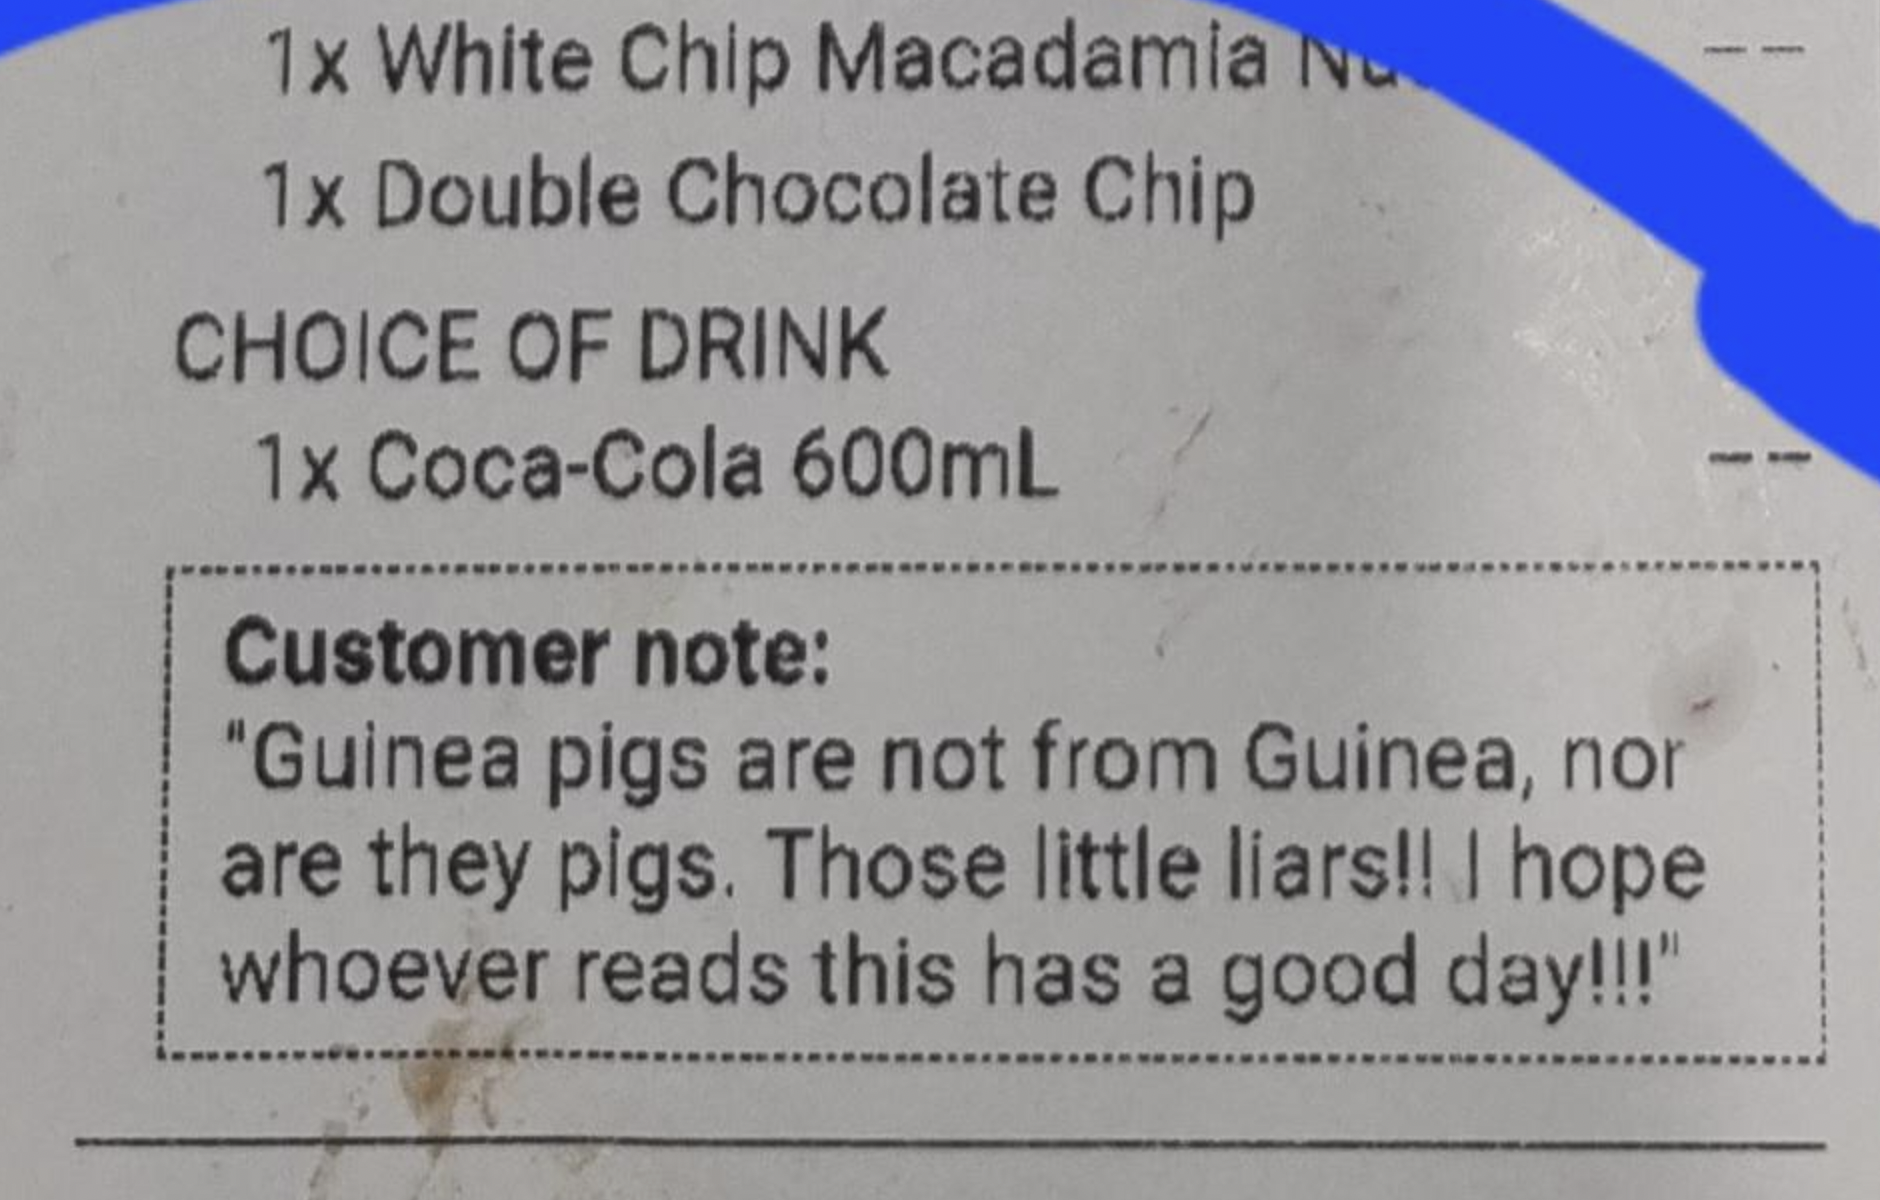 funny receipt with a fun fact